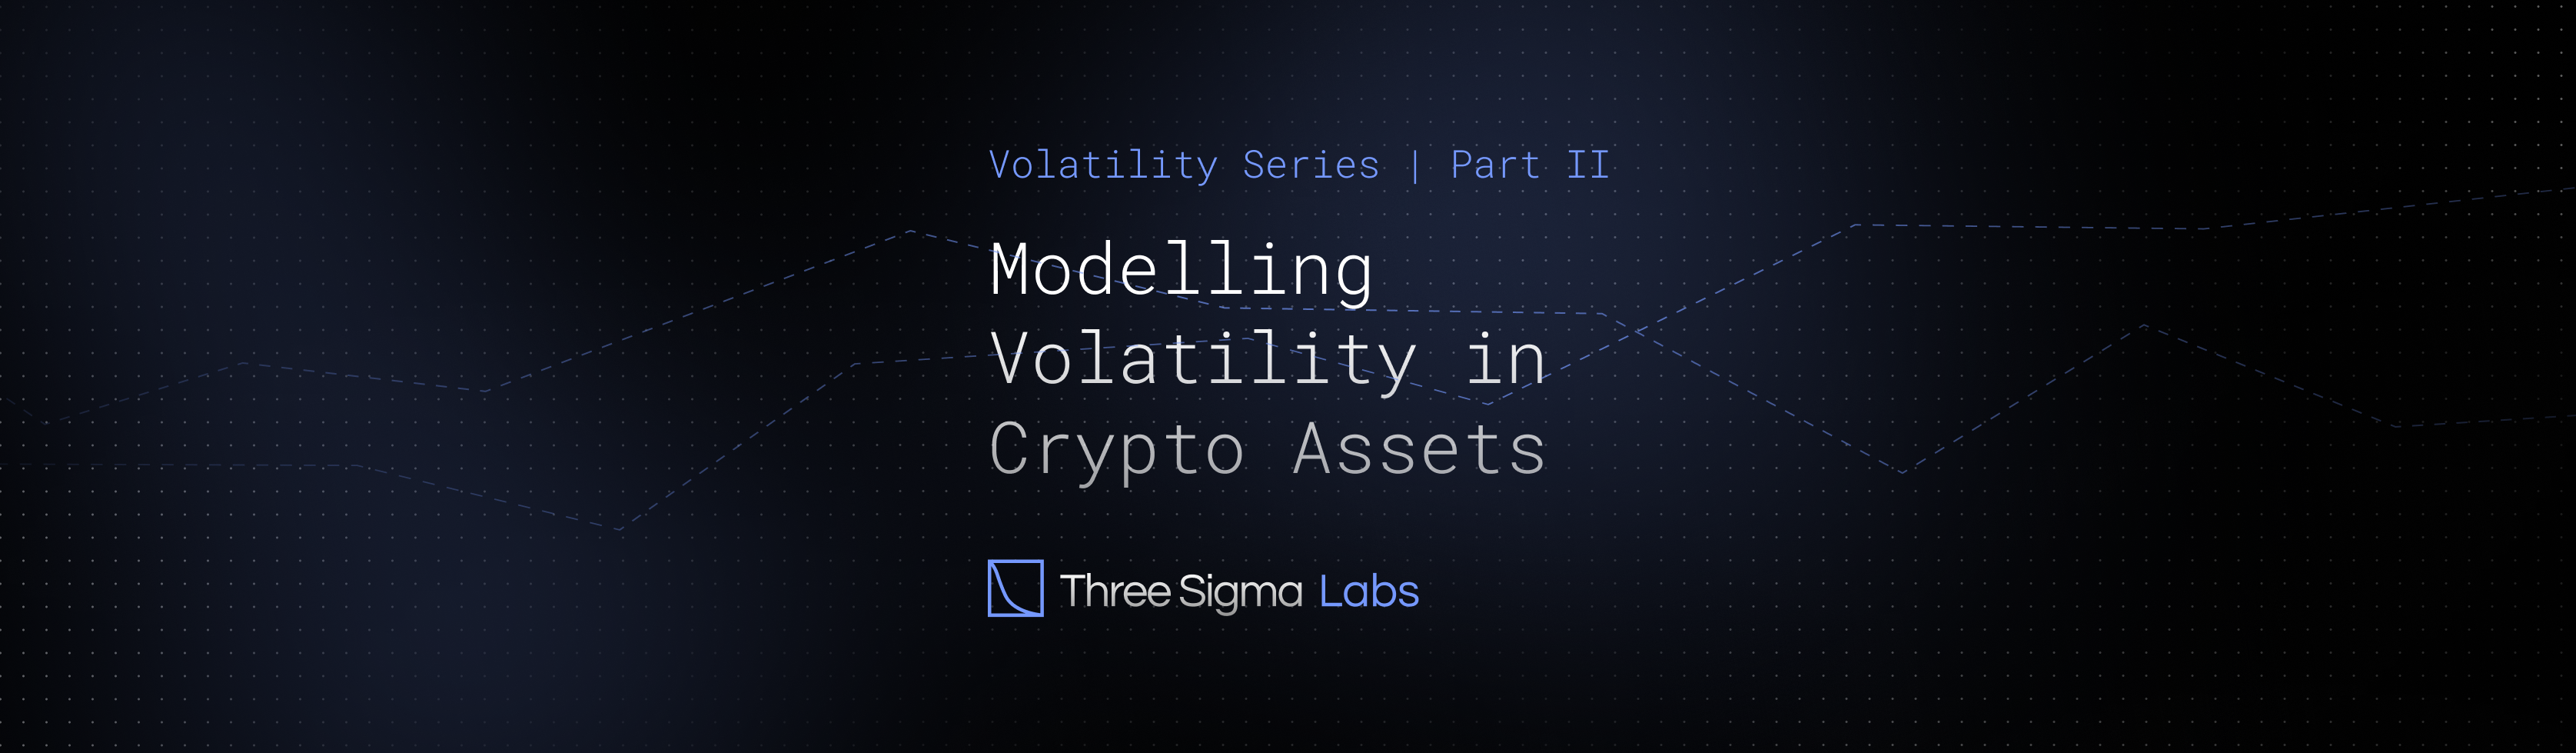 Cover Image for Volatility Series Part II - Modelling Volatility in Crypto Assets